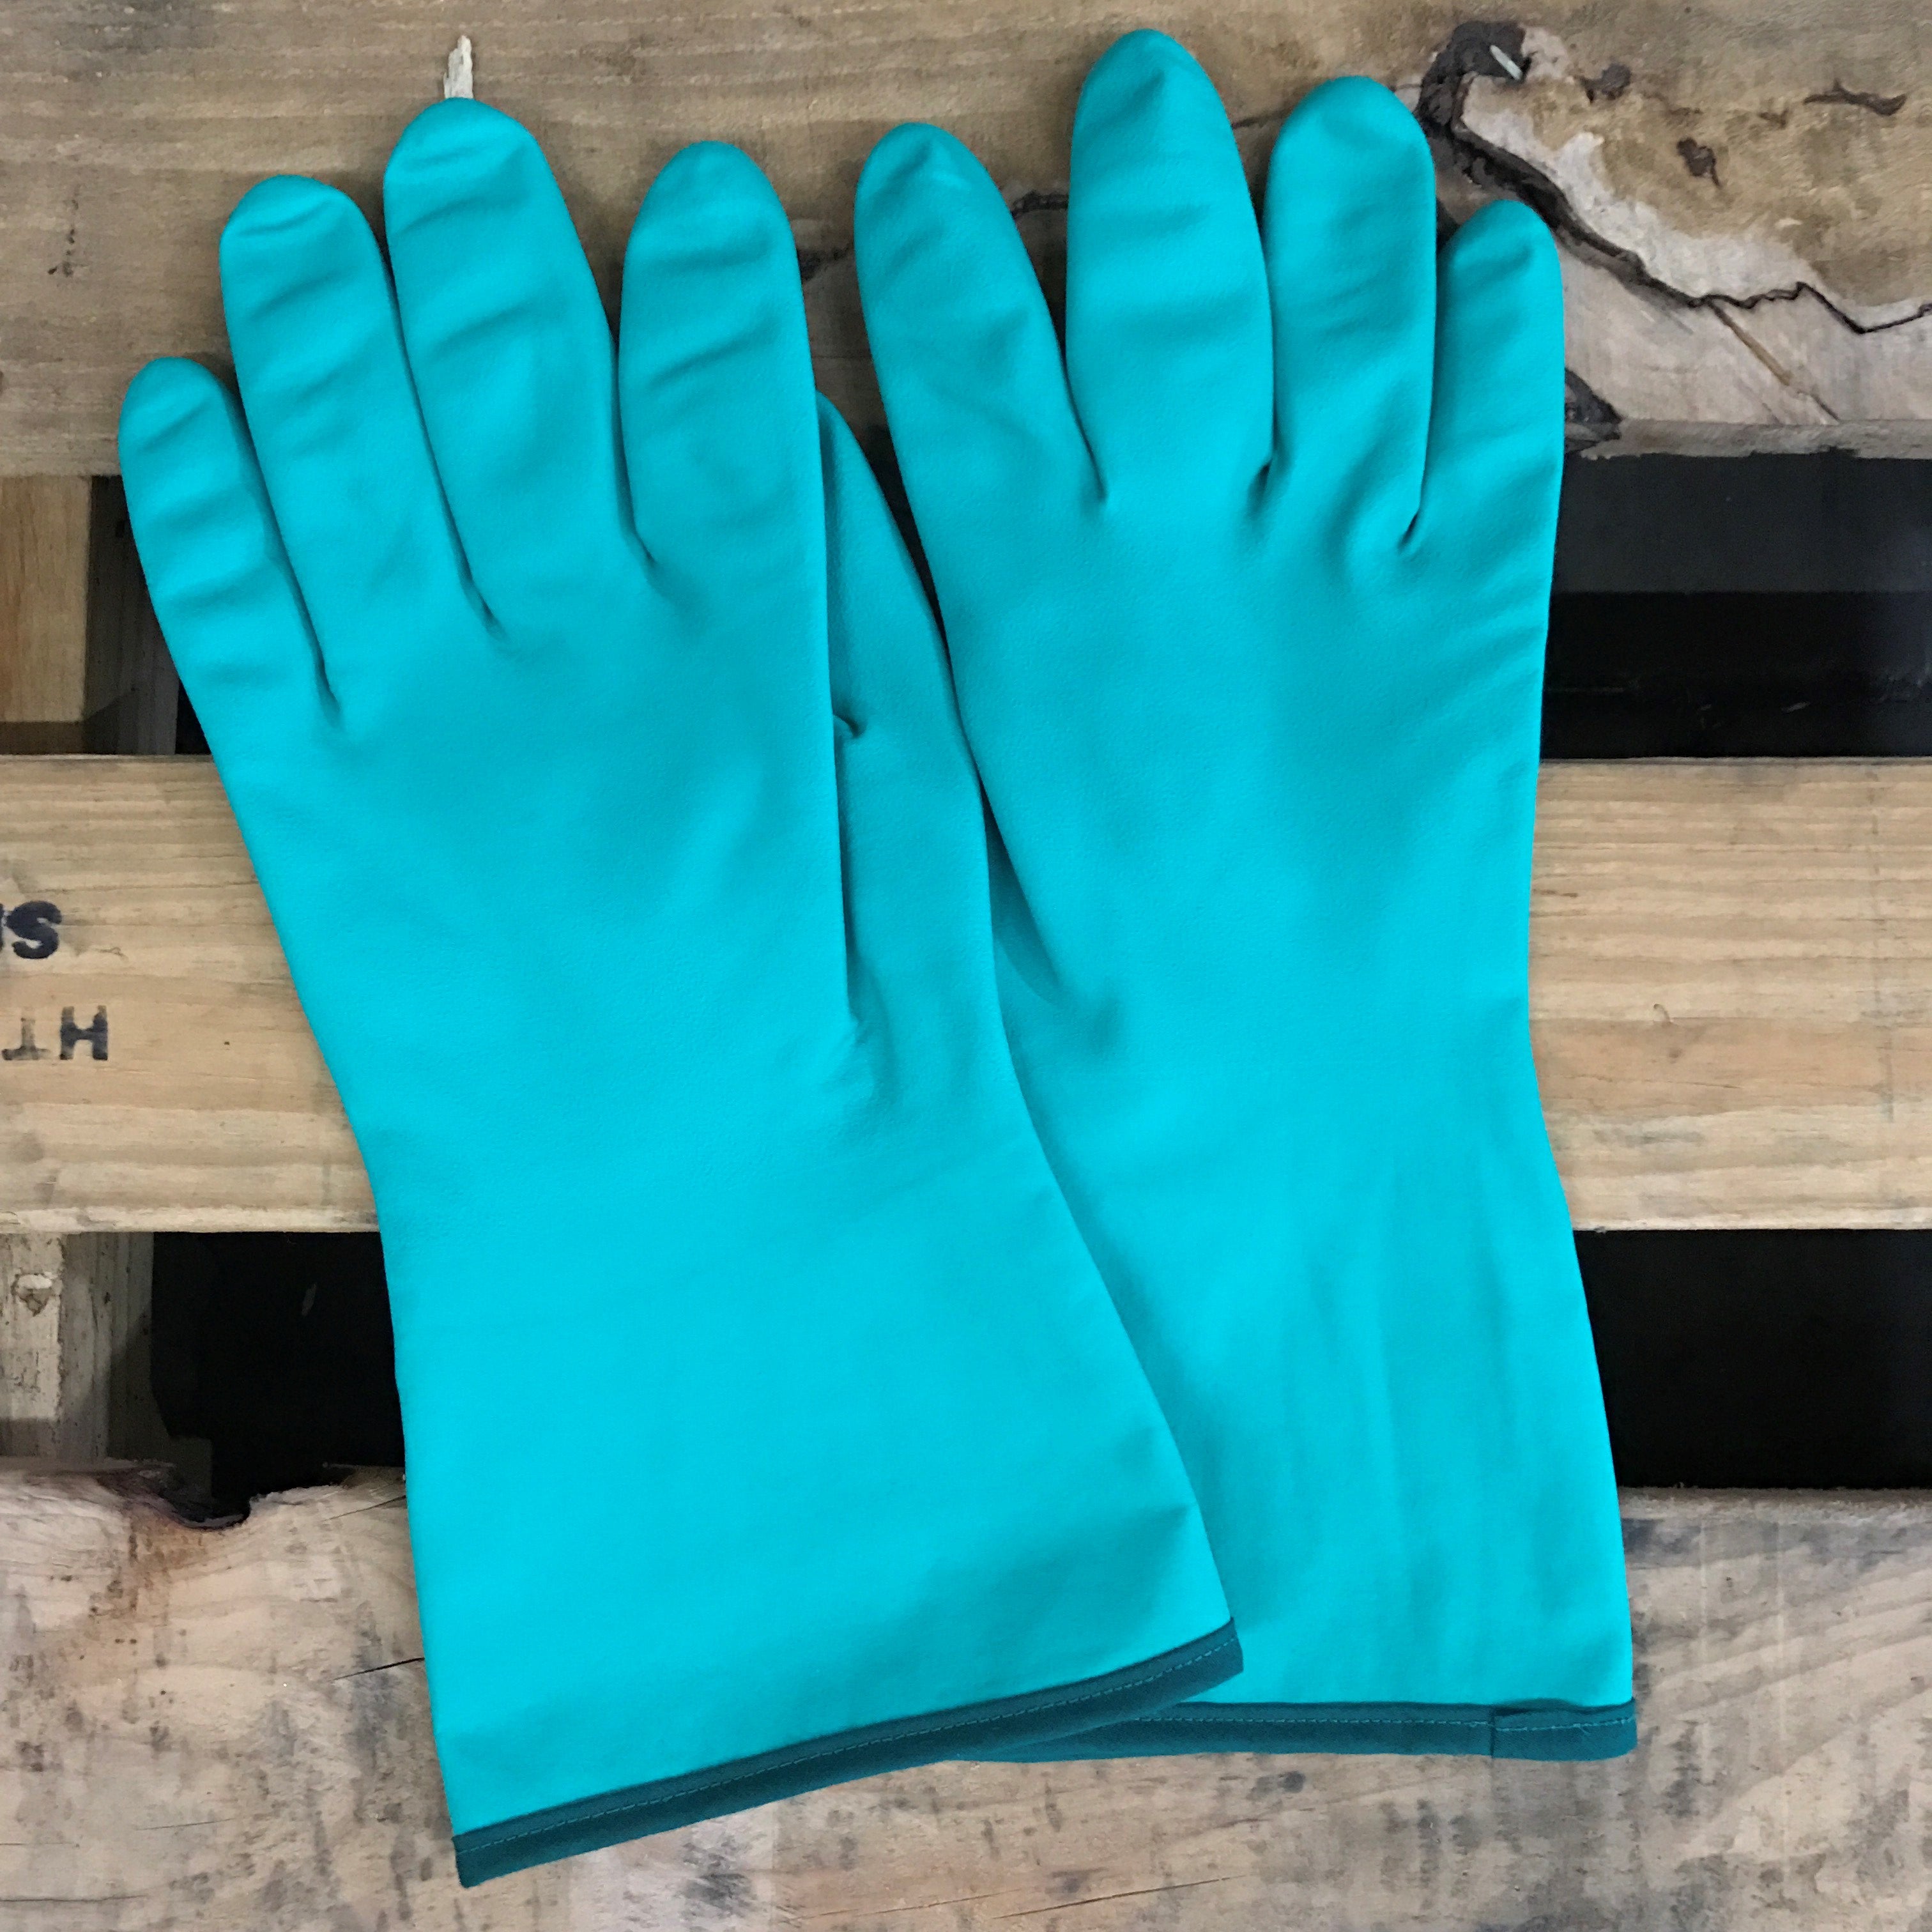 GD CARE- Green Nitrile Shell Bonded Glove With Cotton Lining-eSafety Supplies, Inc